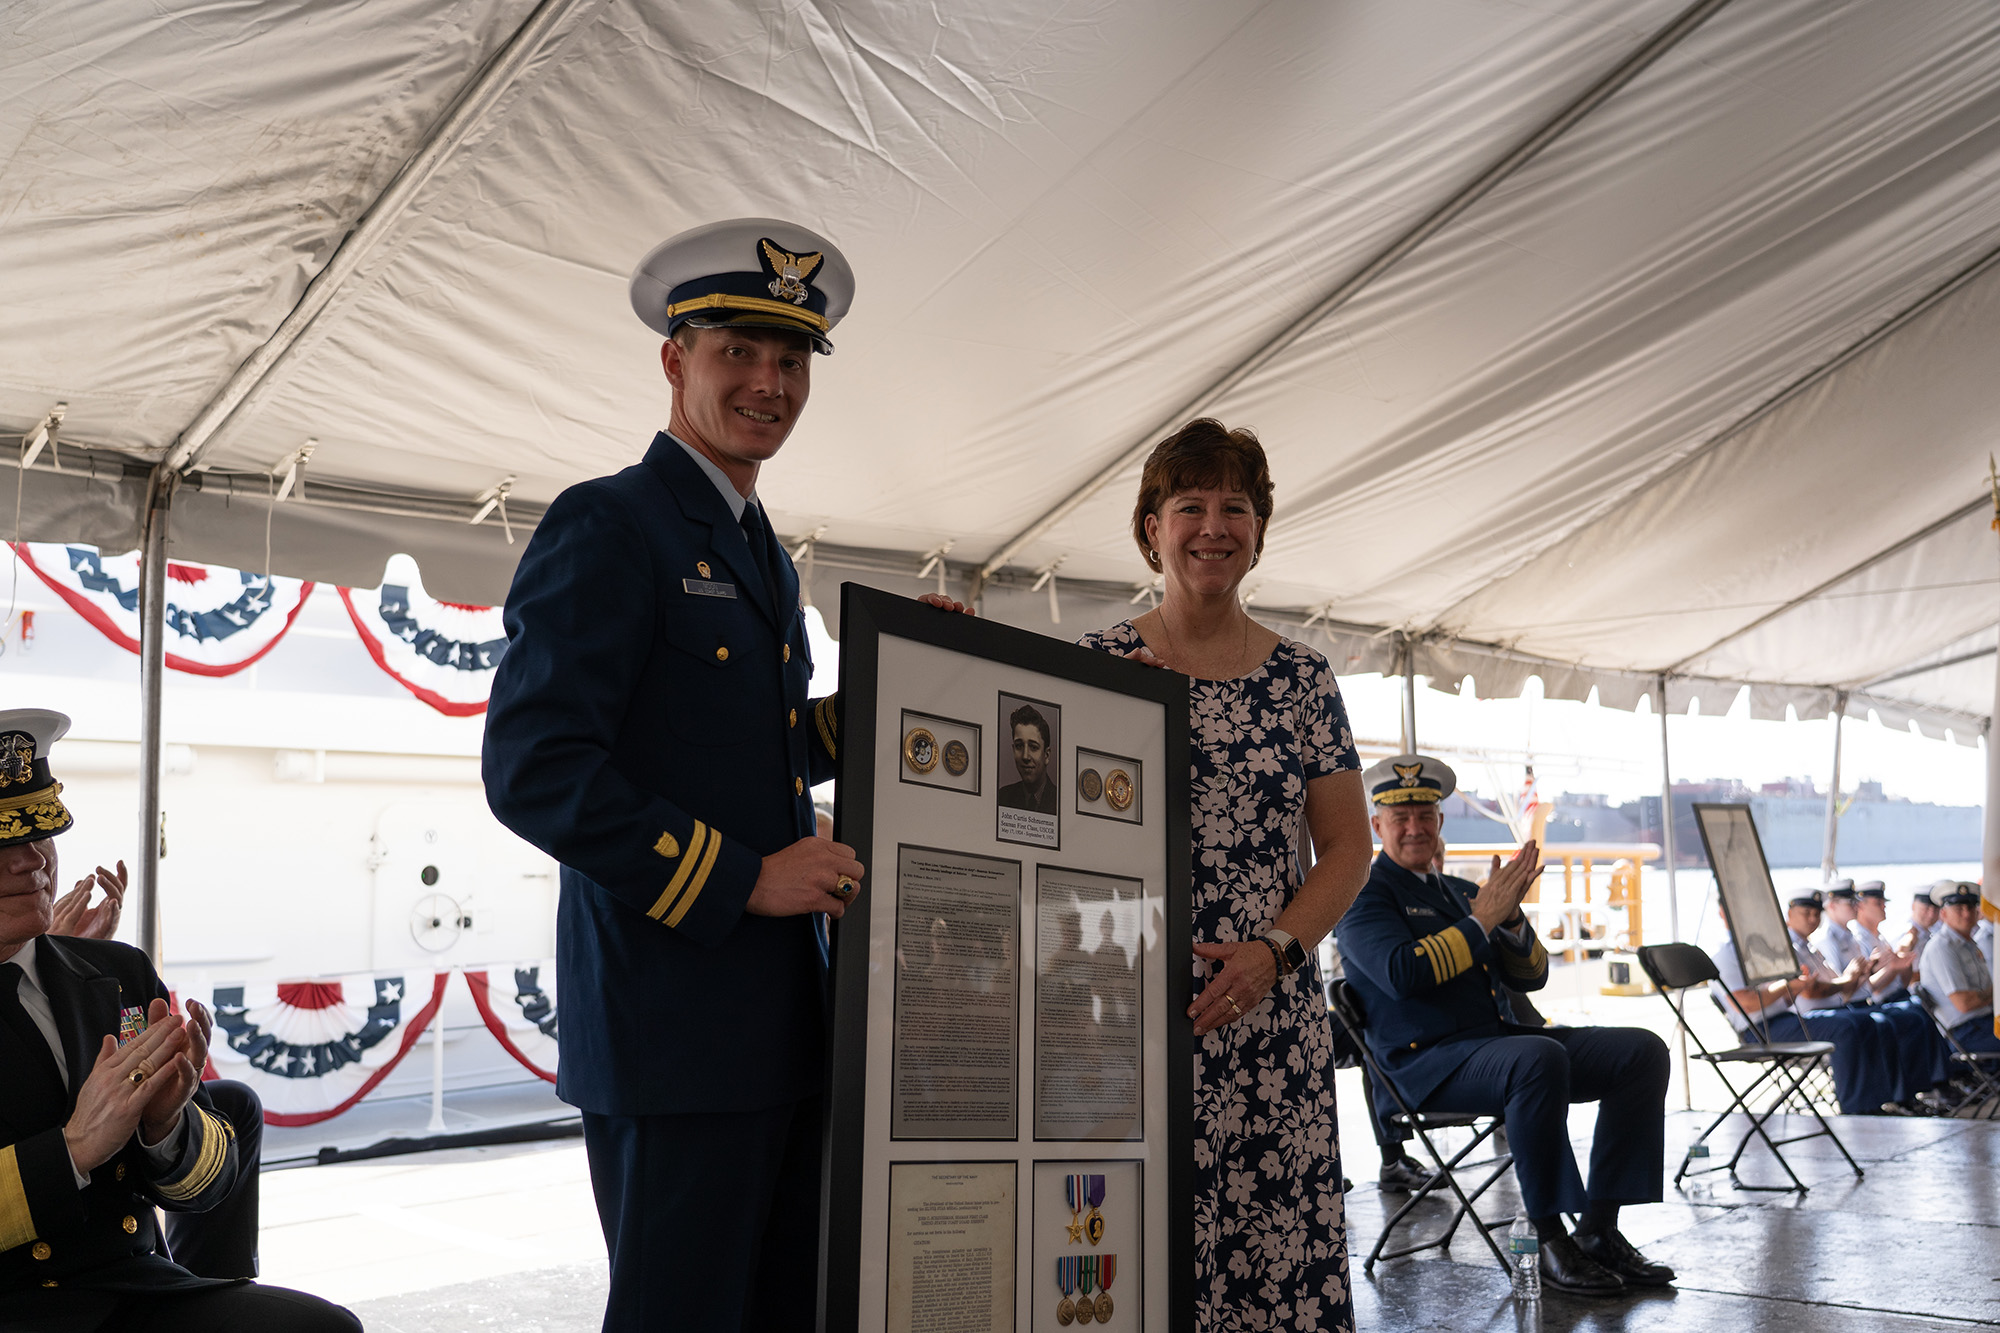 The Coast Guard Cutter John Scheuerman's commanding officer, Lt. Trent Moon, and the ship's sponsor, Mrs. Nancy Vannoy, pose for a photo commissioning ceremony in Tampa, Florida, Feb. 23, 2022. The John Scheuerman is the 46th Sentinel-class fast response cutter and the fifth of six FRC's to be homeported in Manama, Bahrain, which will replace the aging 110’ Island Class Patrol Boats. Photo: U.S. Coast Guard